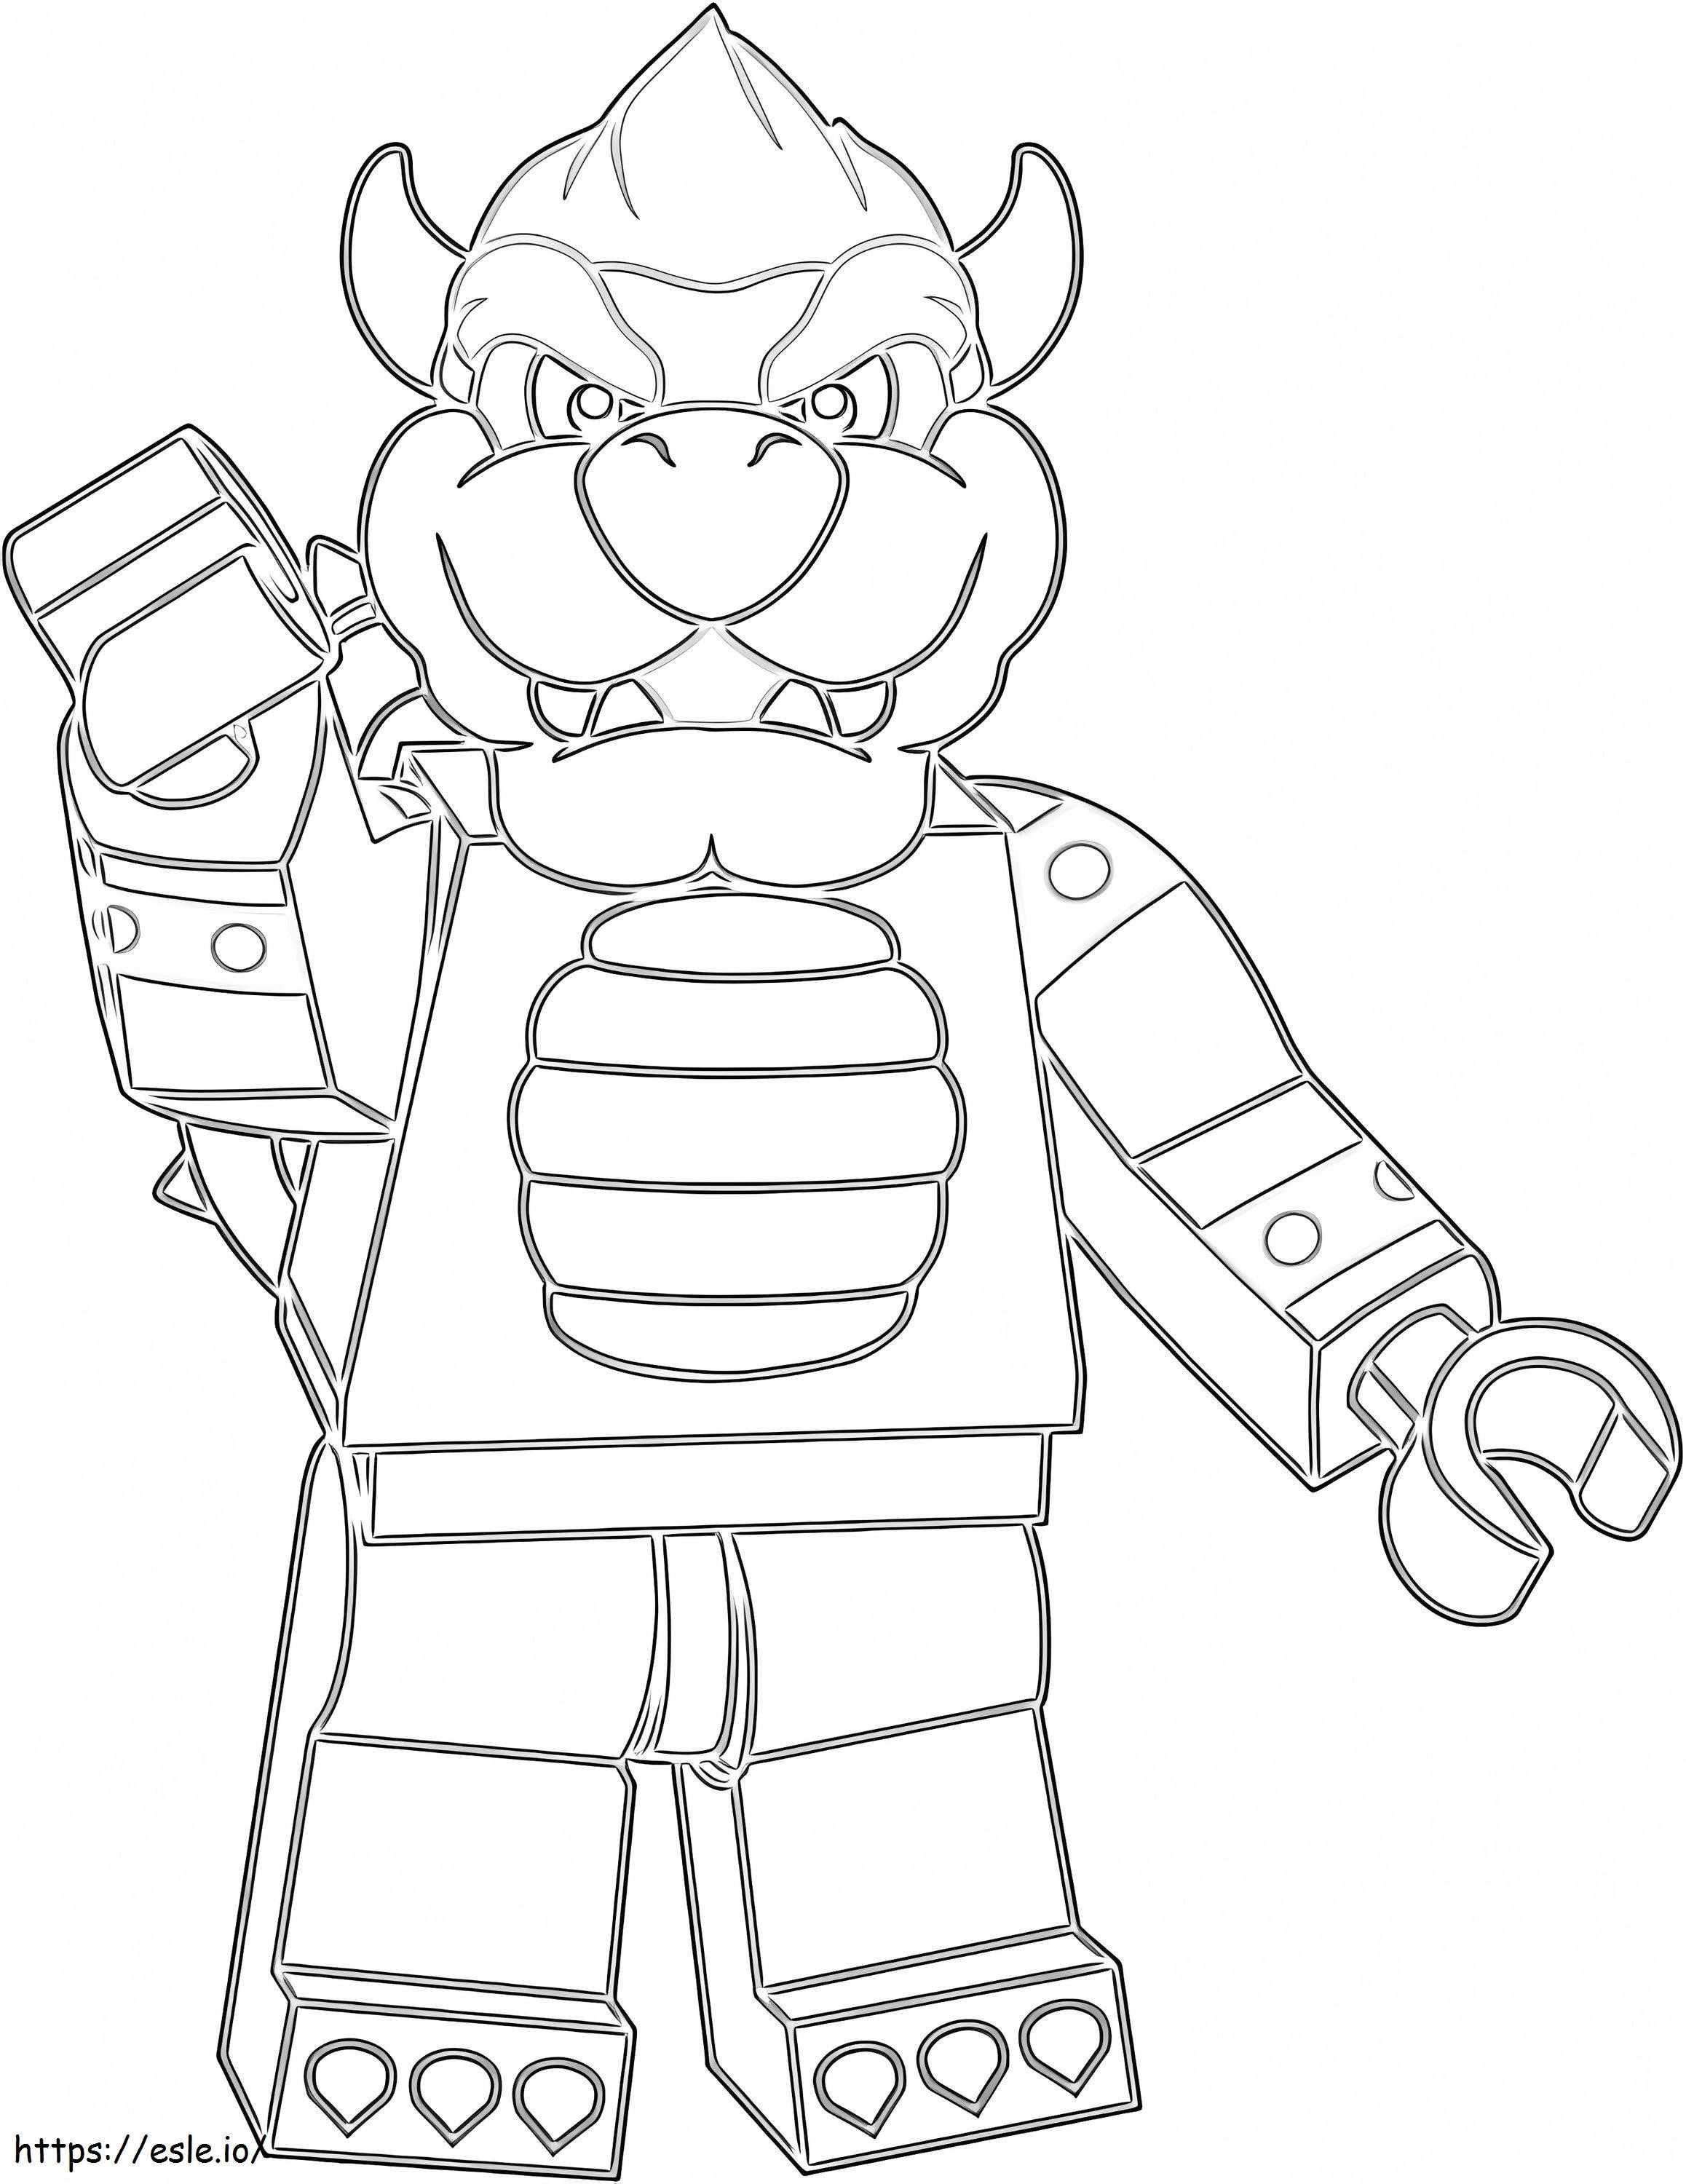 Lego Bowser coloring page